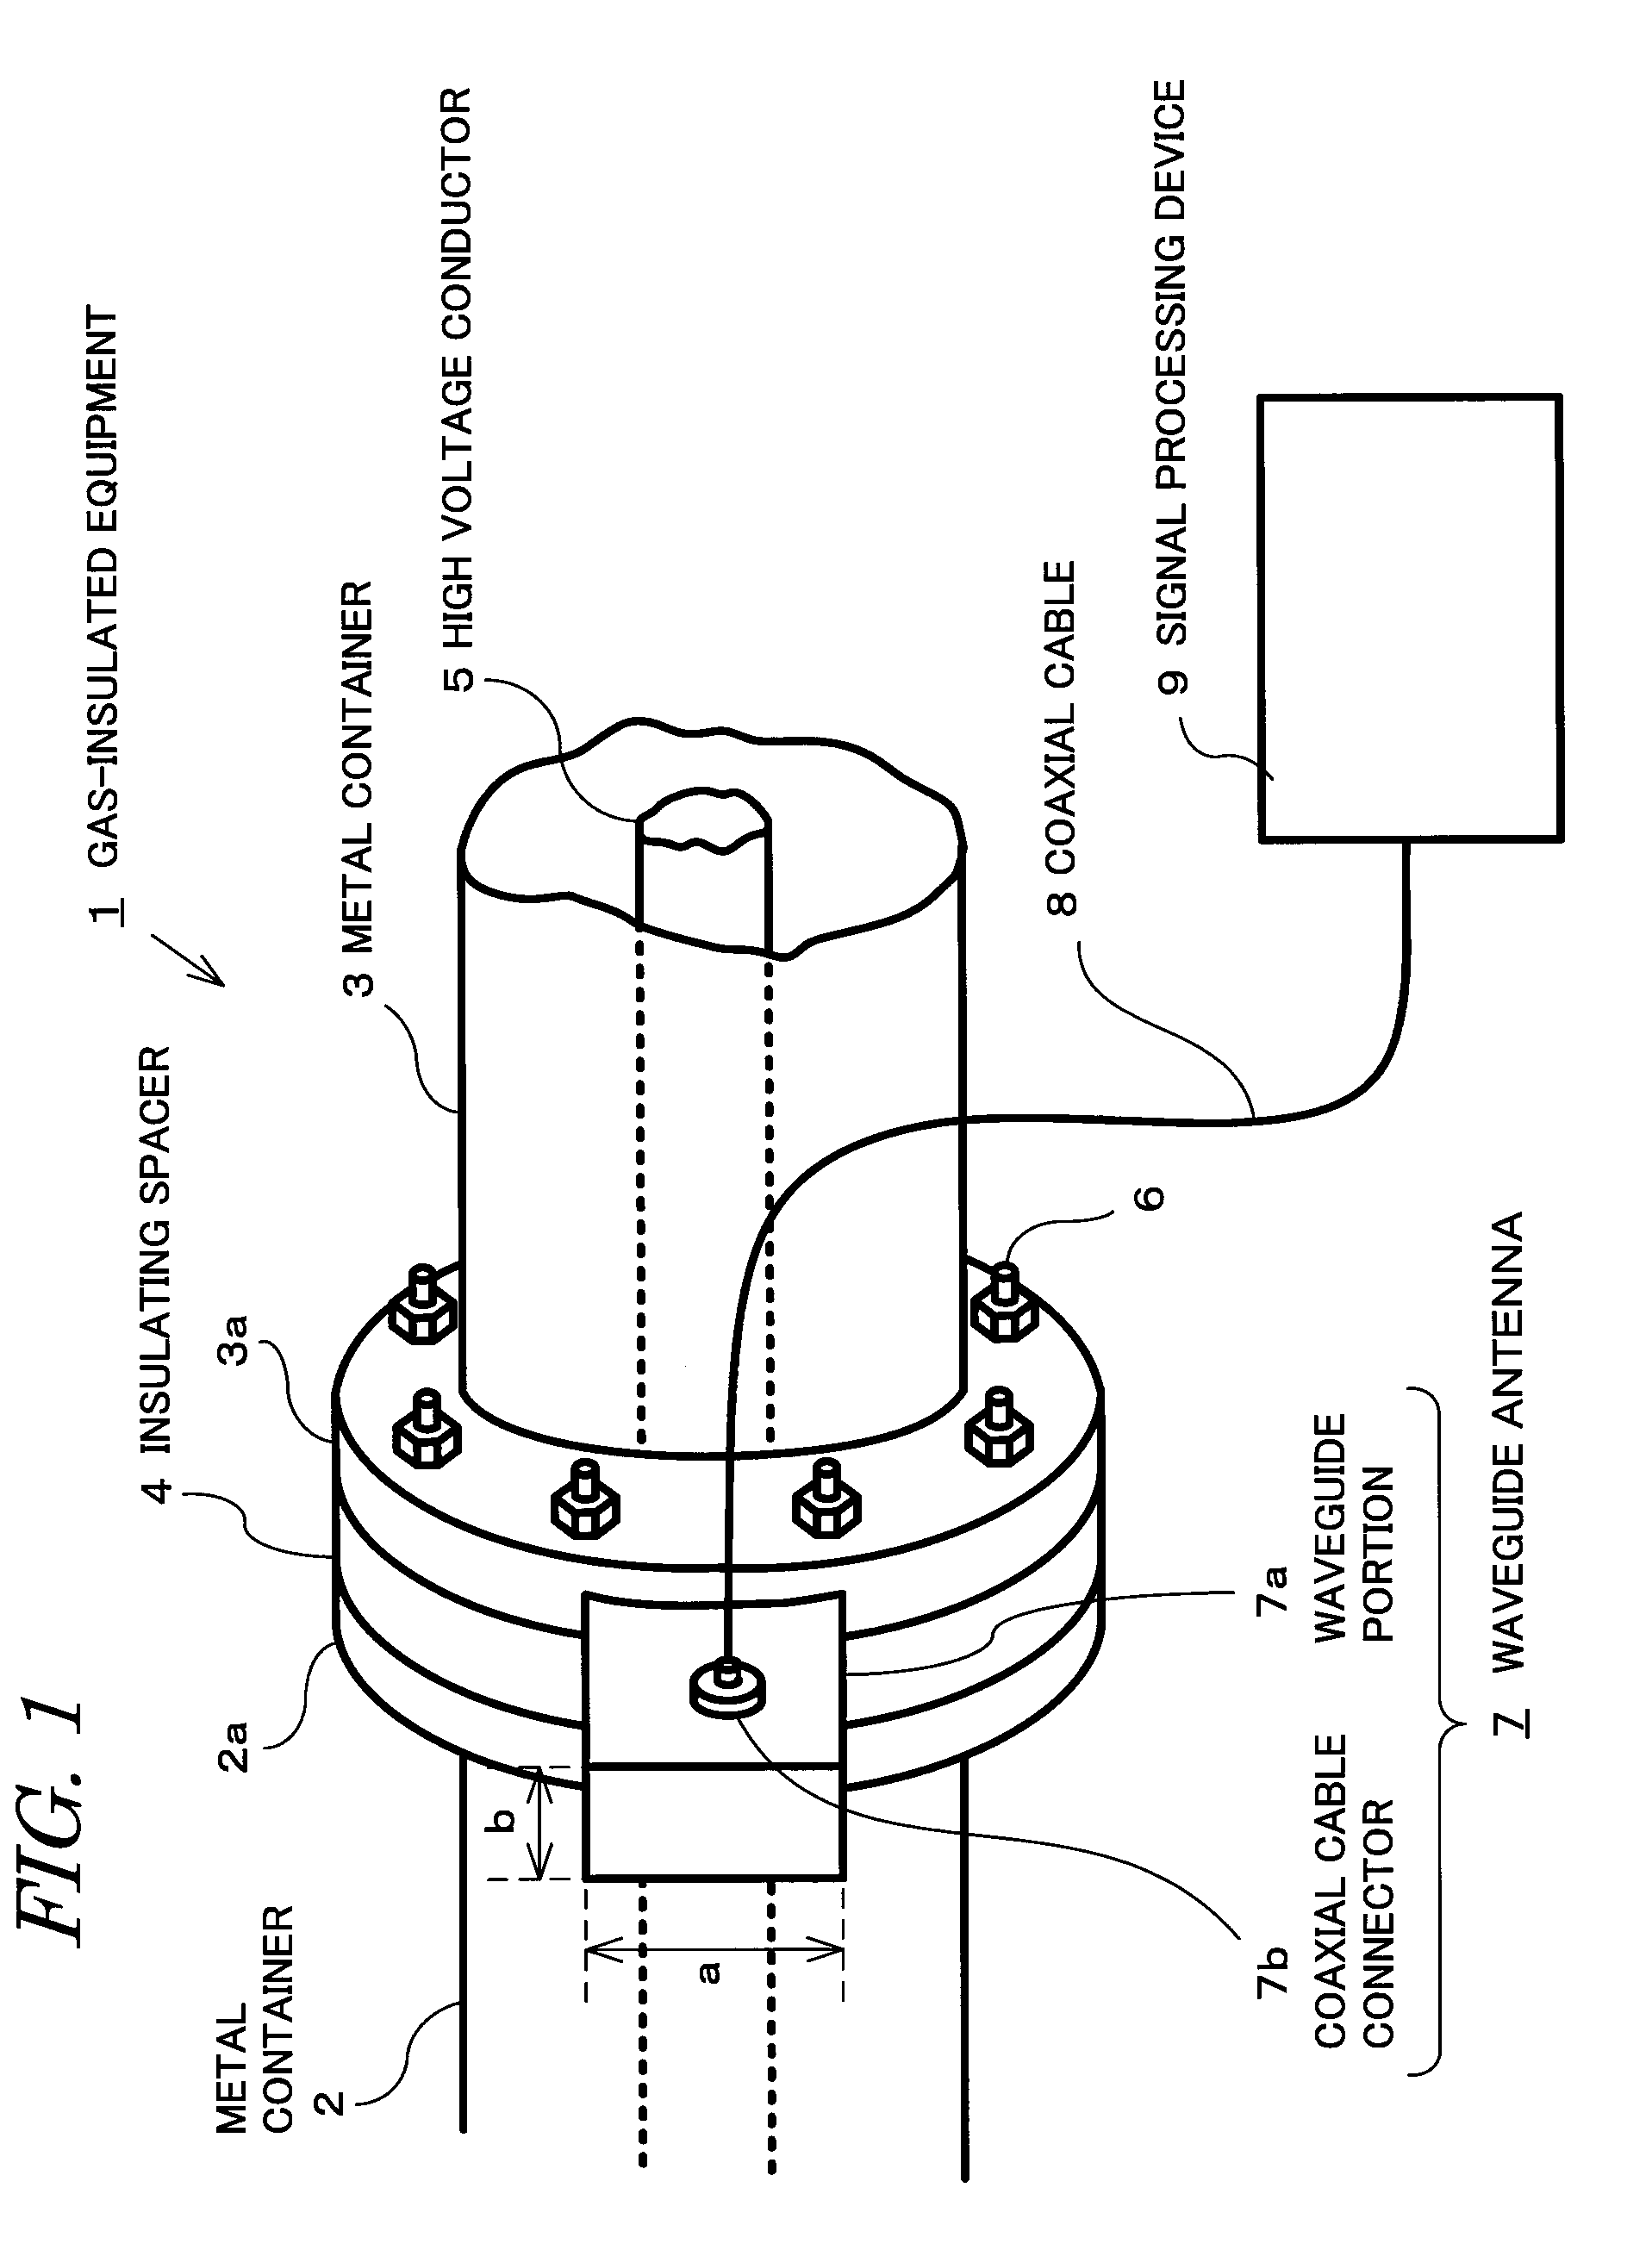 Partial discharge detection device